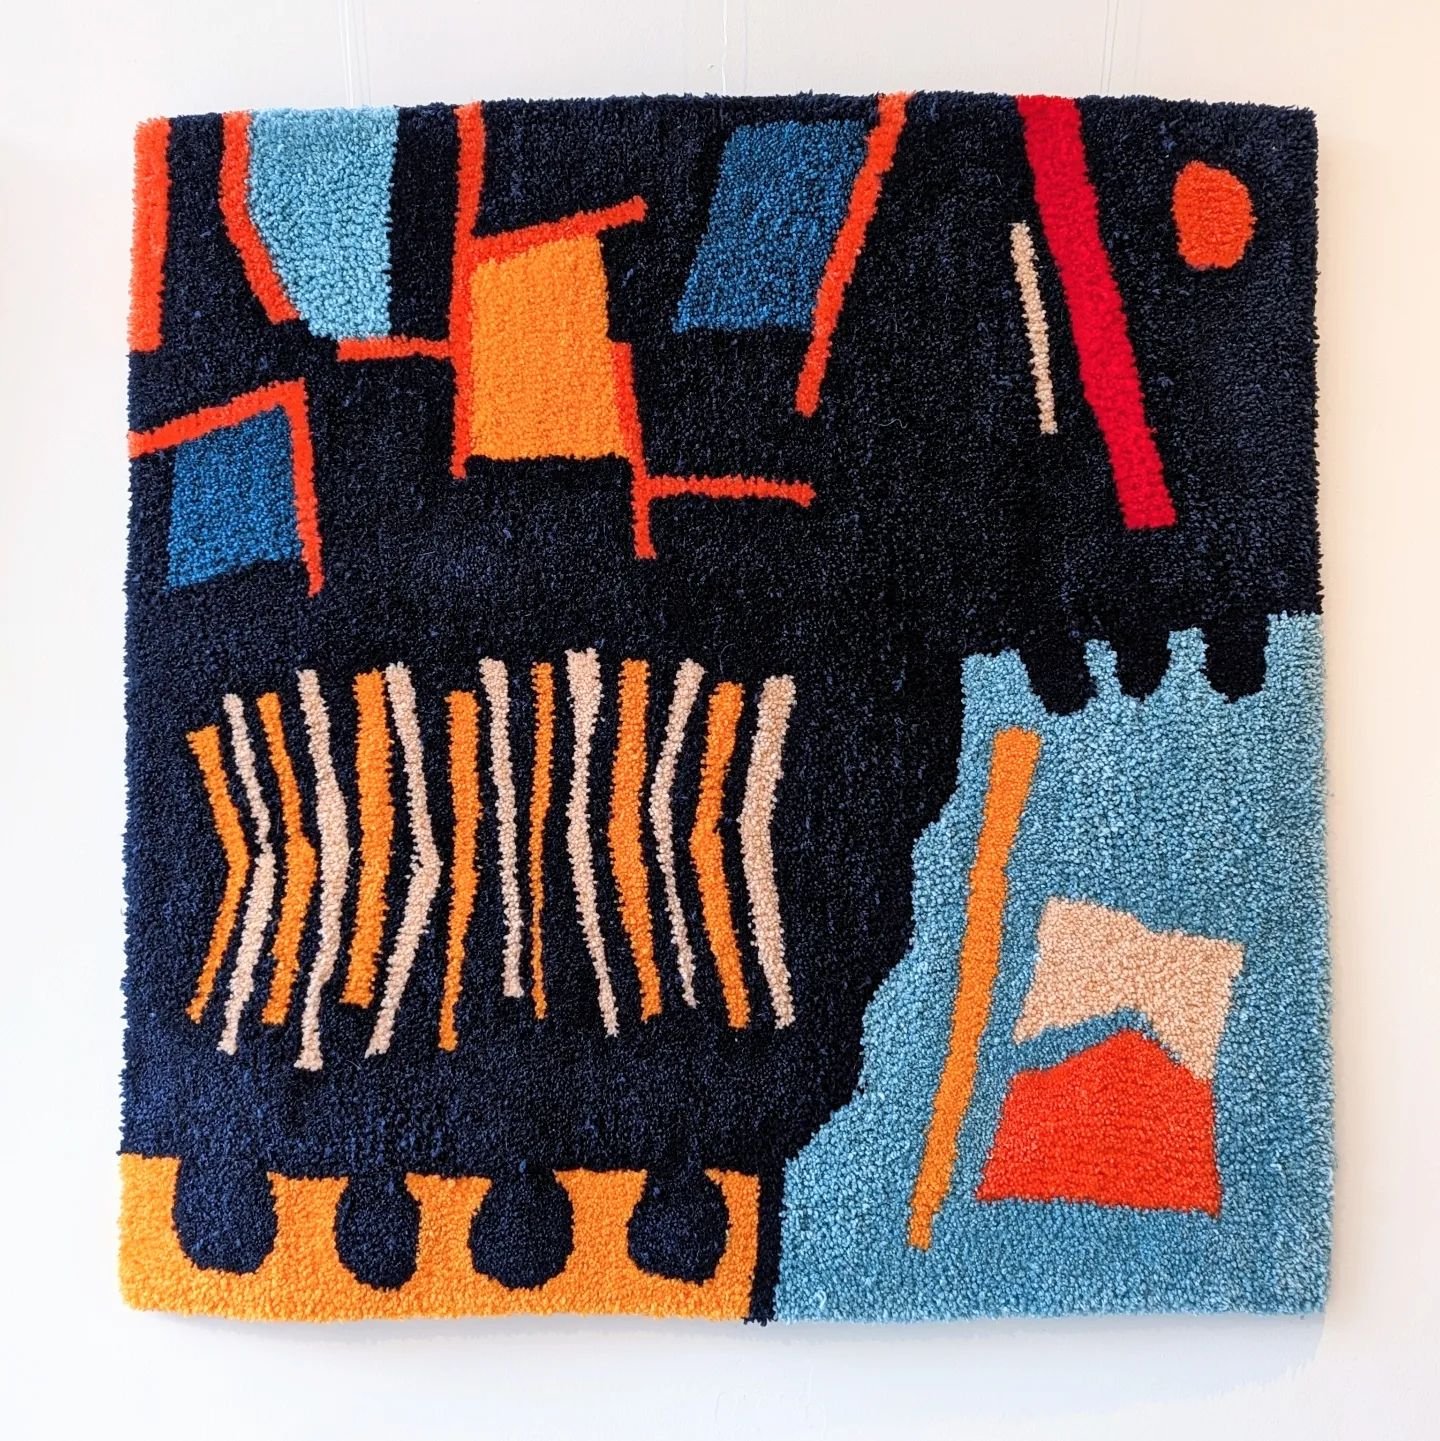 New in the gallery! ✨ 
Brightening up the walls this week are Lucy Caster's new tufted wall hangings. Inspired by her earlier Haymarket Square works, these hangings focus on bold colour, pattern and shapes found in the prints. Lucy studied textile de